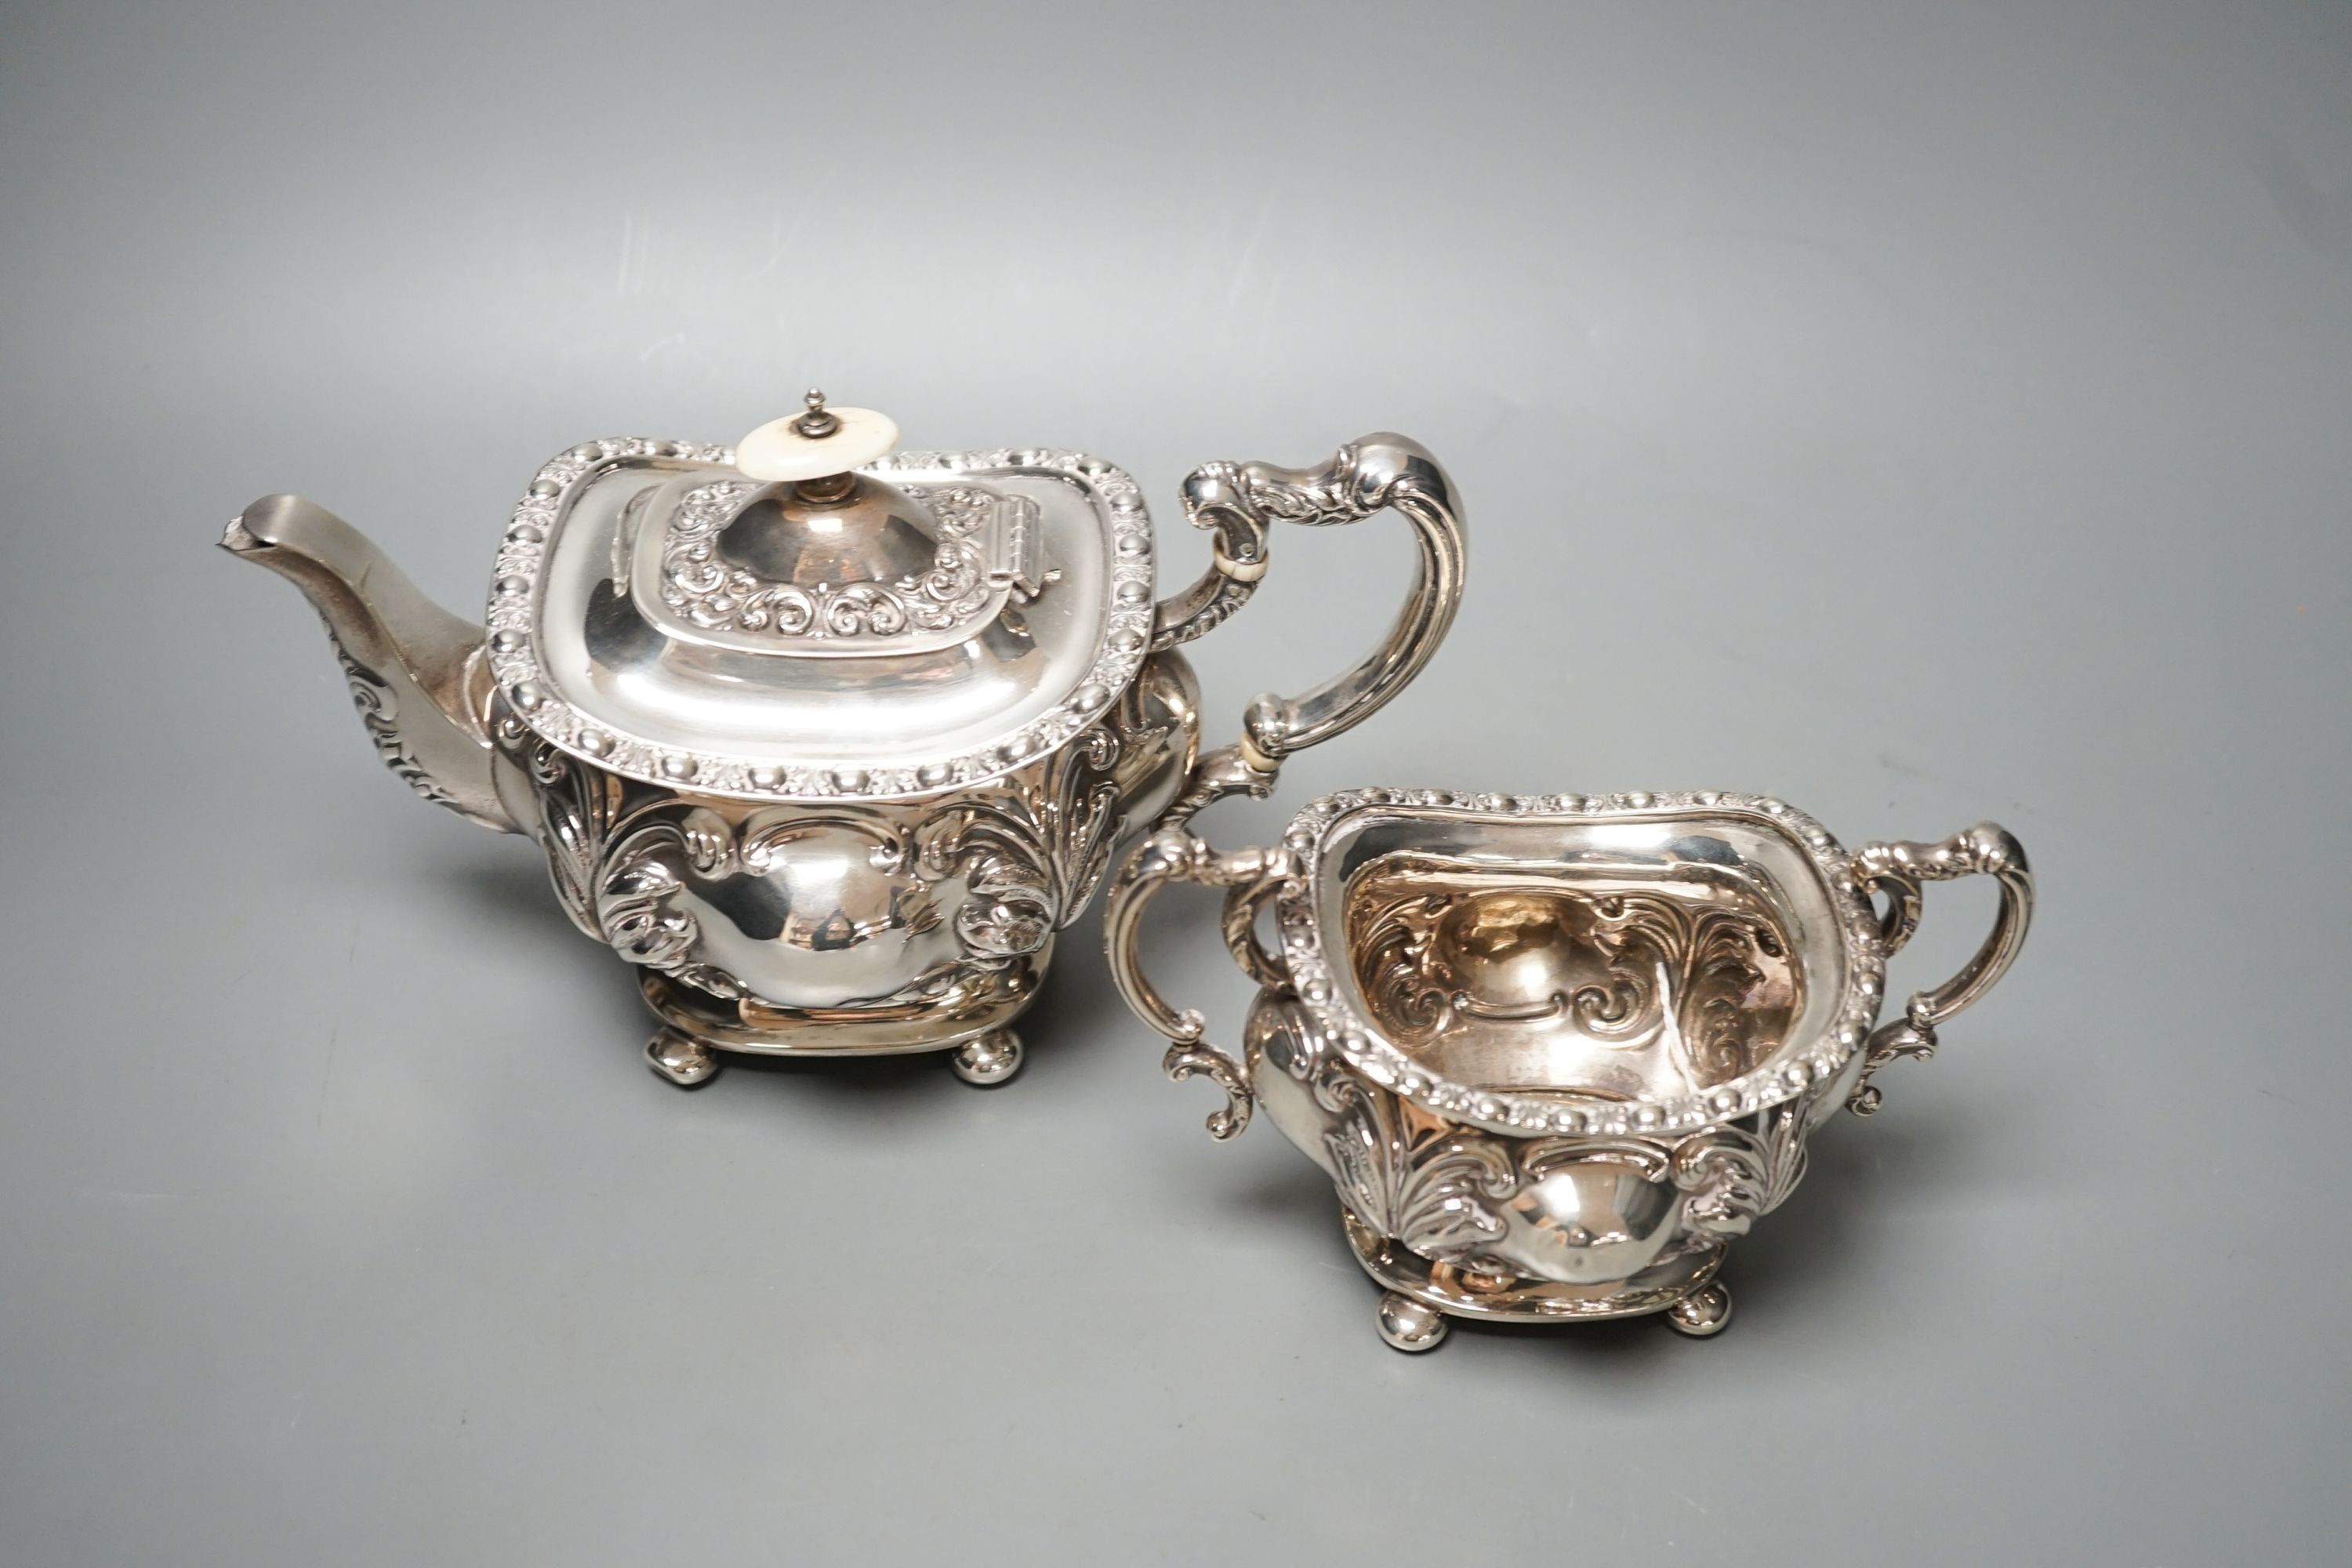 An Edwardian embossed silver teapot and matching sugar bowl, William Aitken, Chester, 1903, gross 21.5oz.